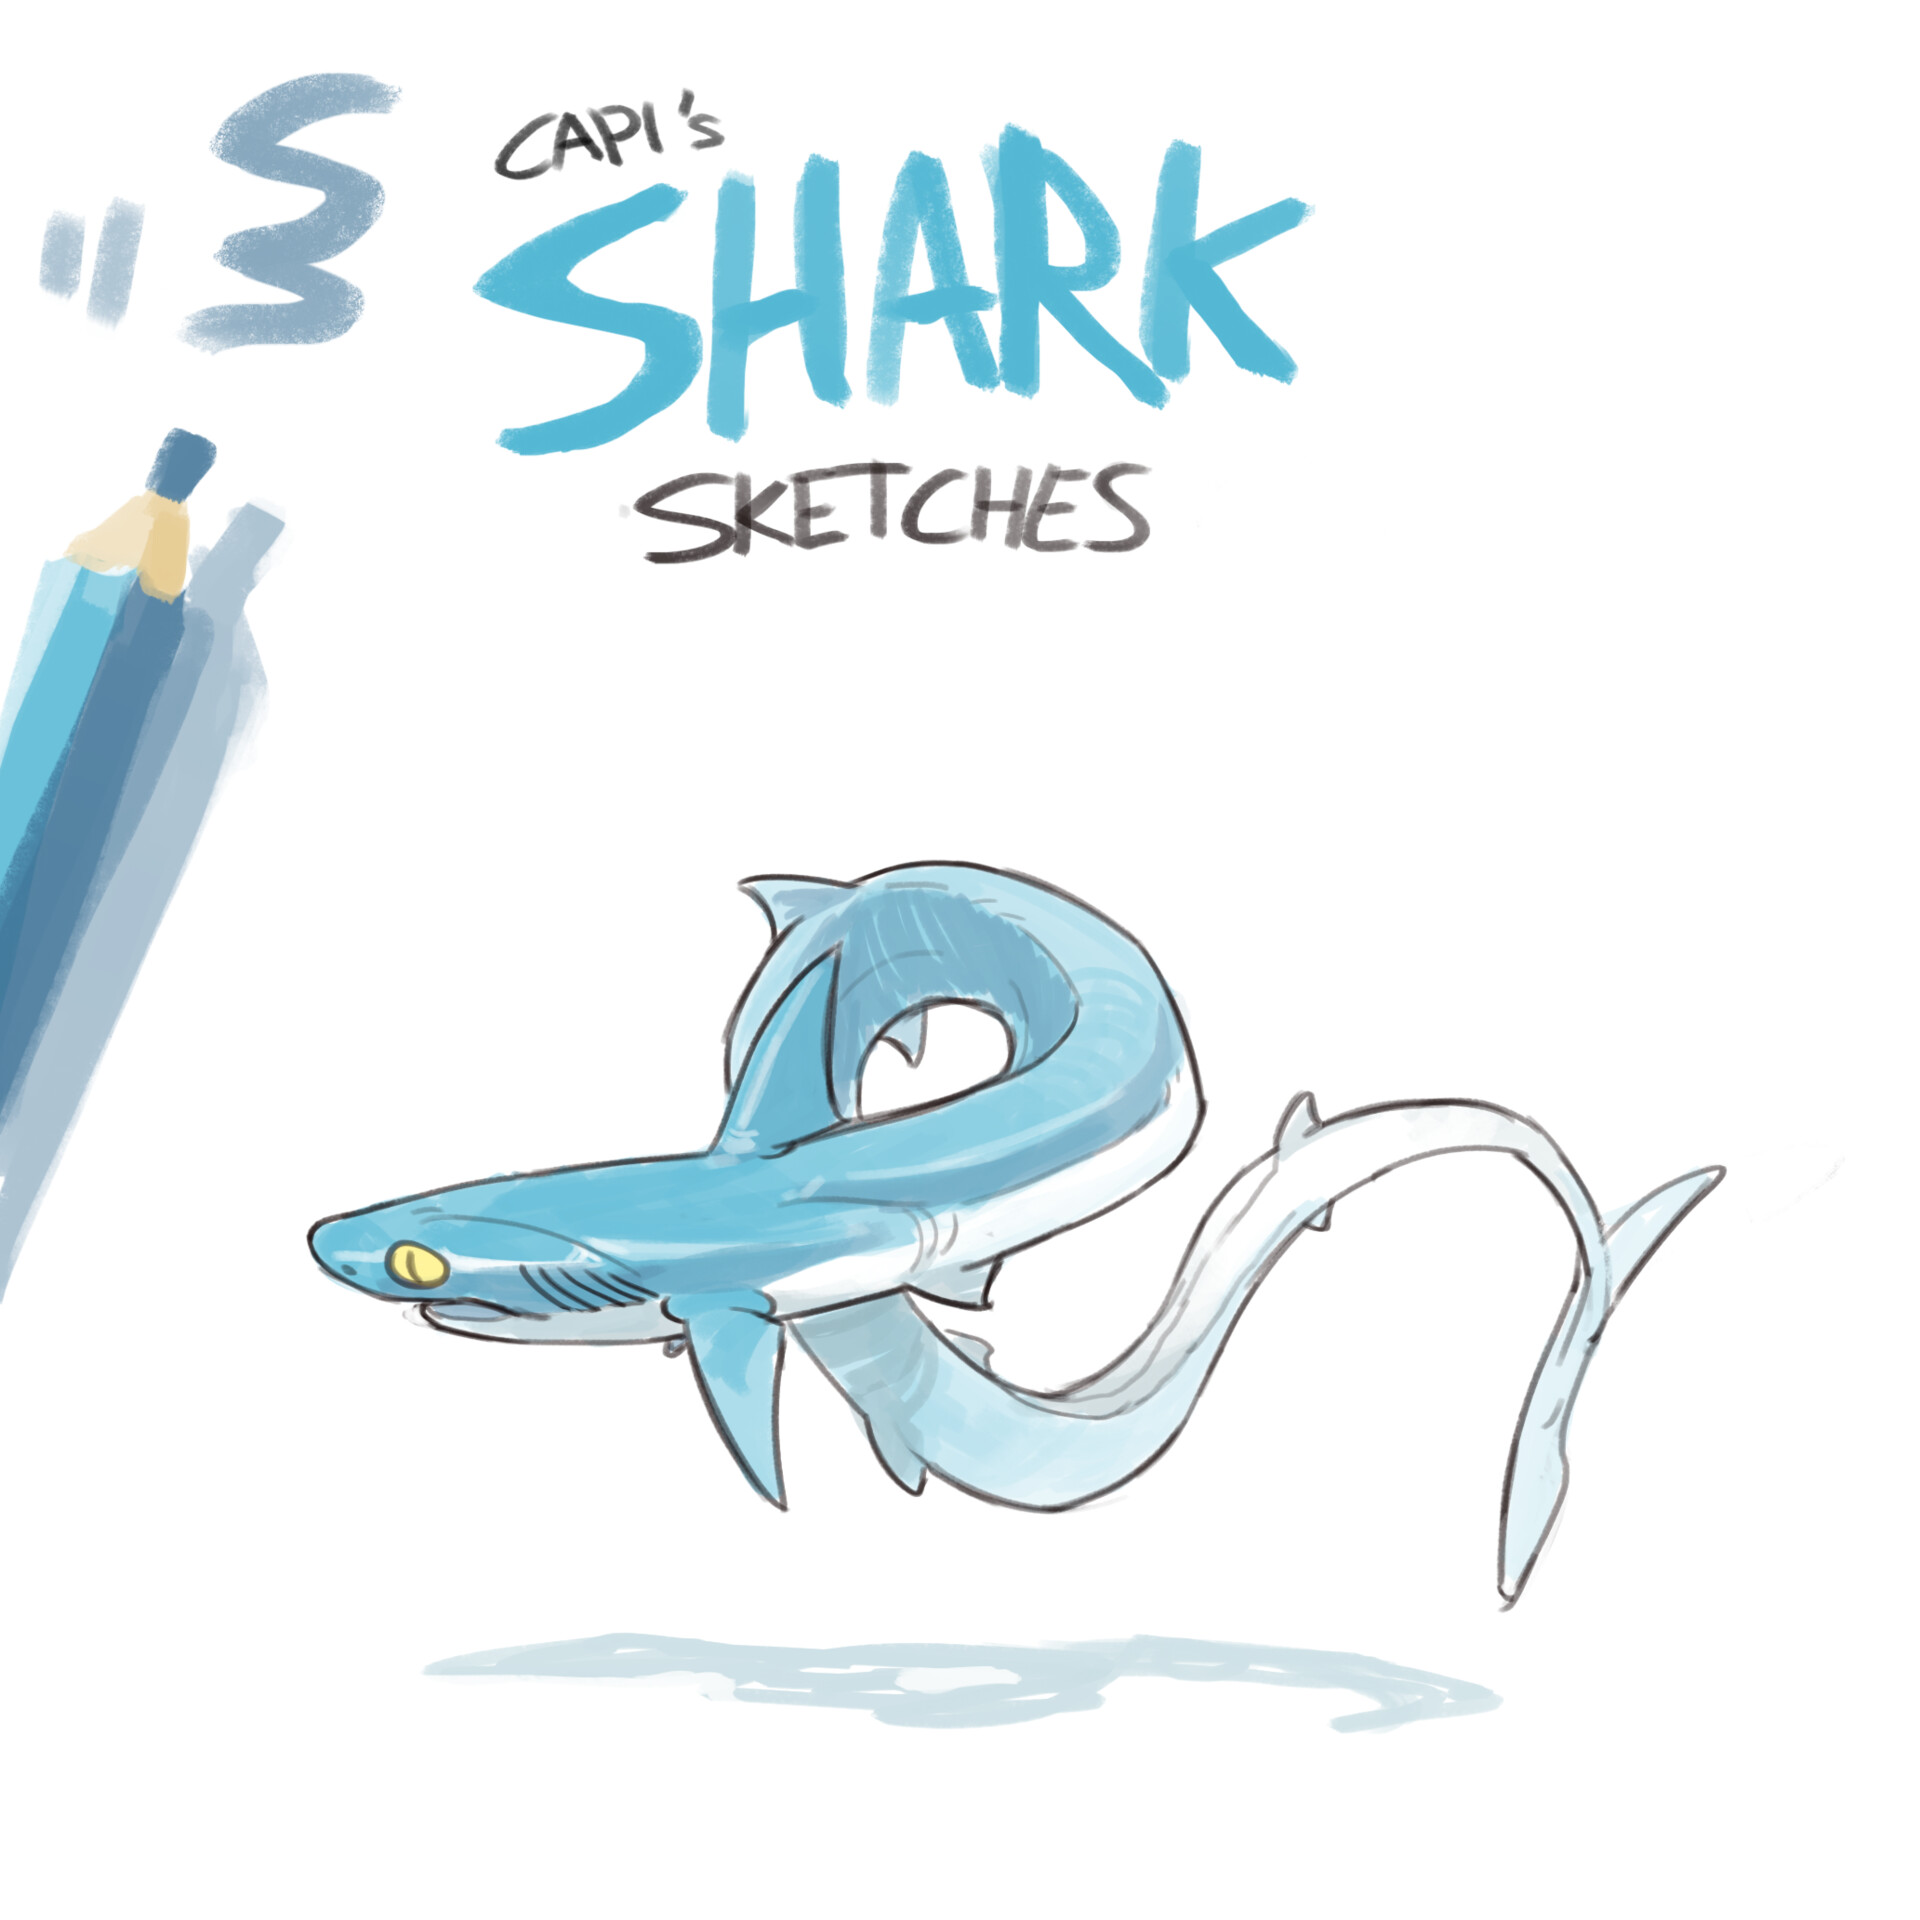 How to draw a shark from the basic fish shape  completed colouredin  drawing  Lets Draw That  Shark drawing Easy animal drawings Sea  creatures drawing